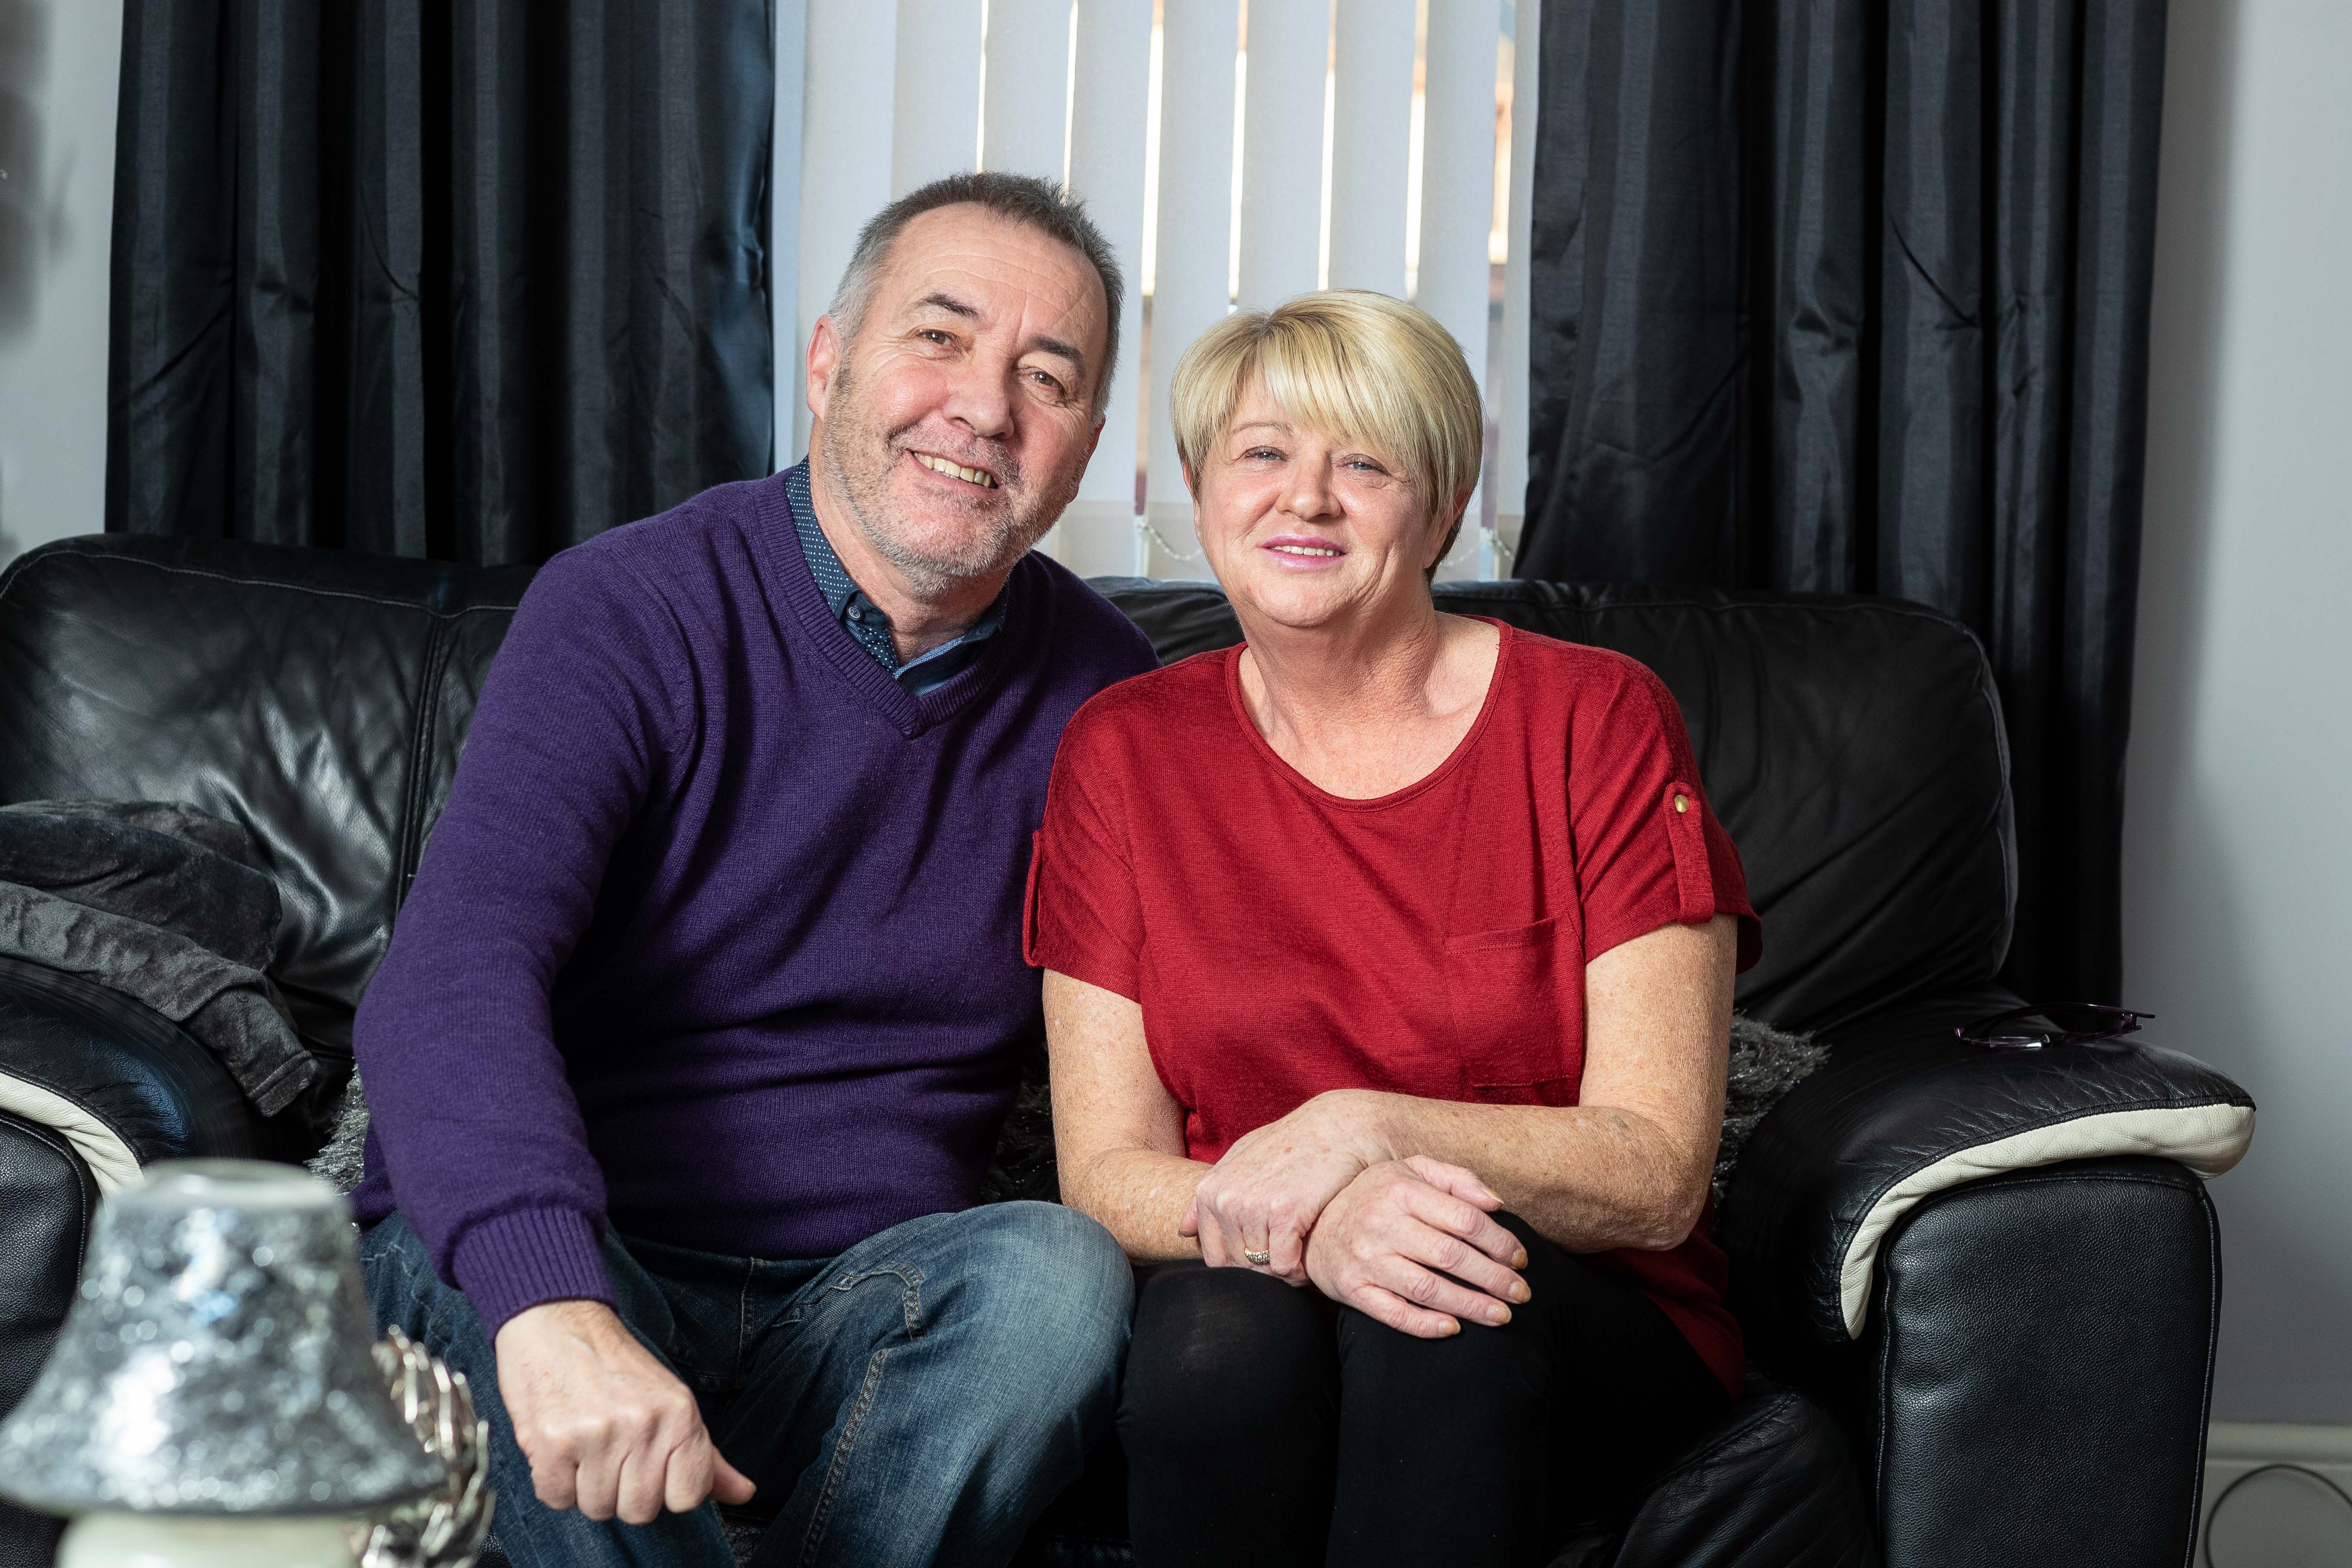 Sandra Murray’s brother in law Dave Nelson, 63, is taking part in Bowel Cancer UK’s ‘Decembeard’ fundraising campaign to raise awareness and funds. (Derek Ironside).